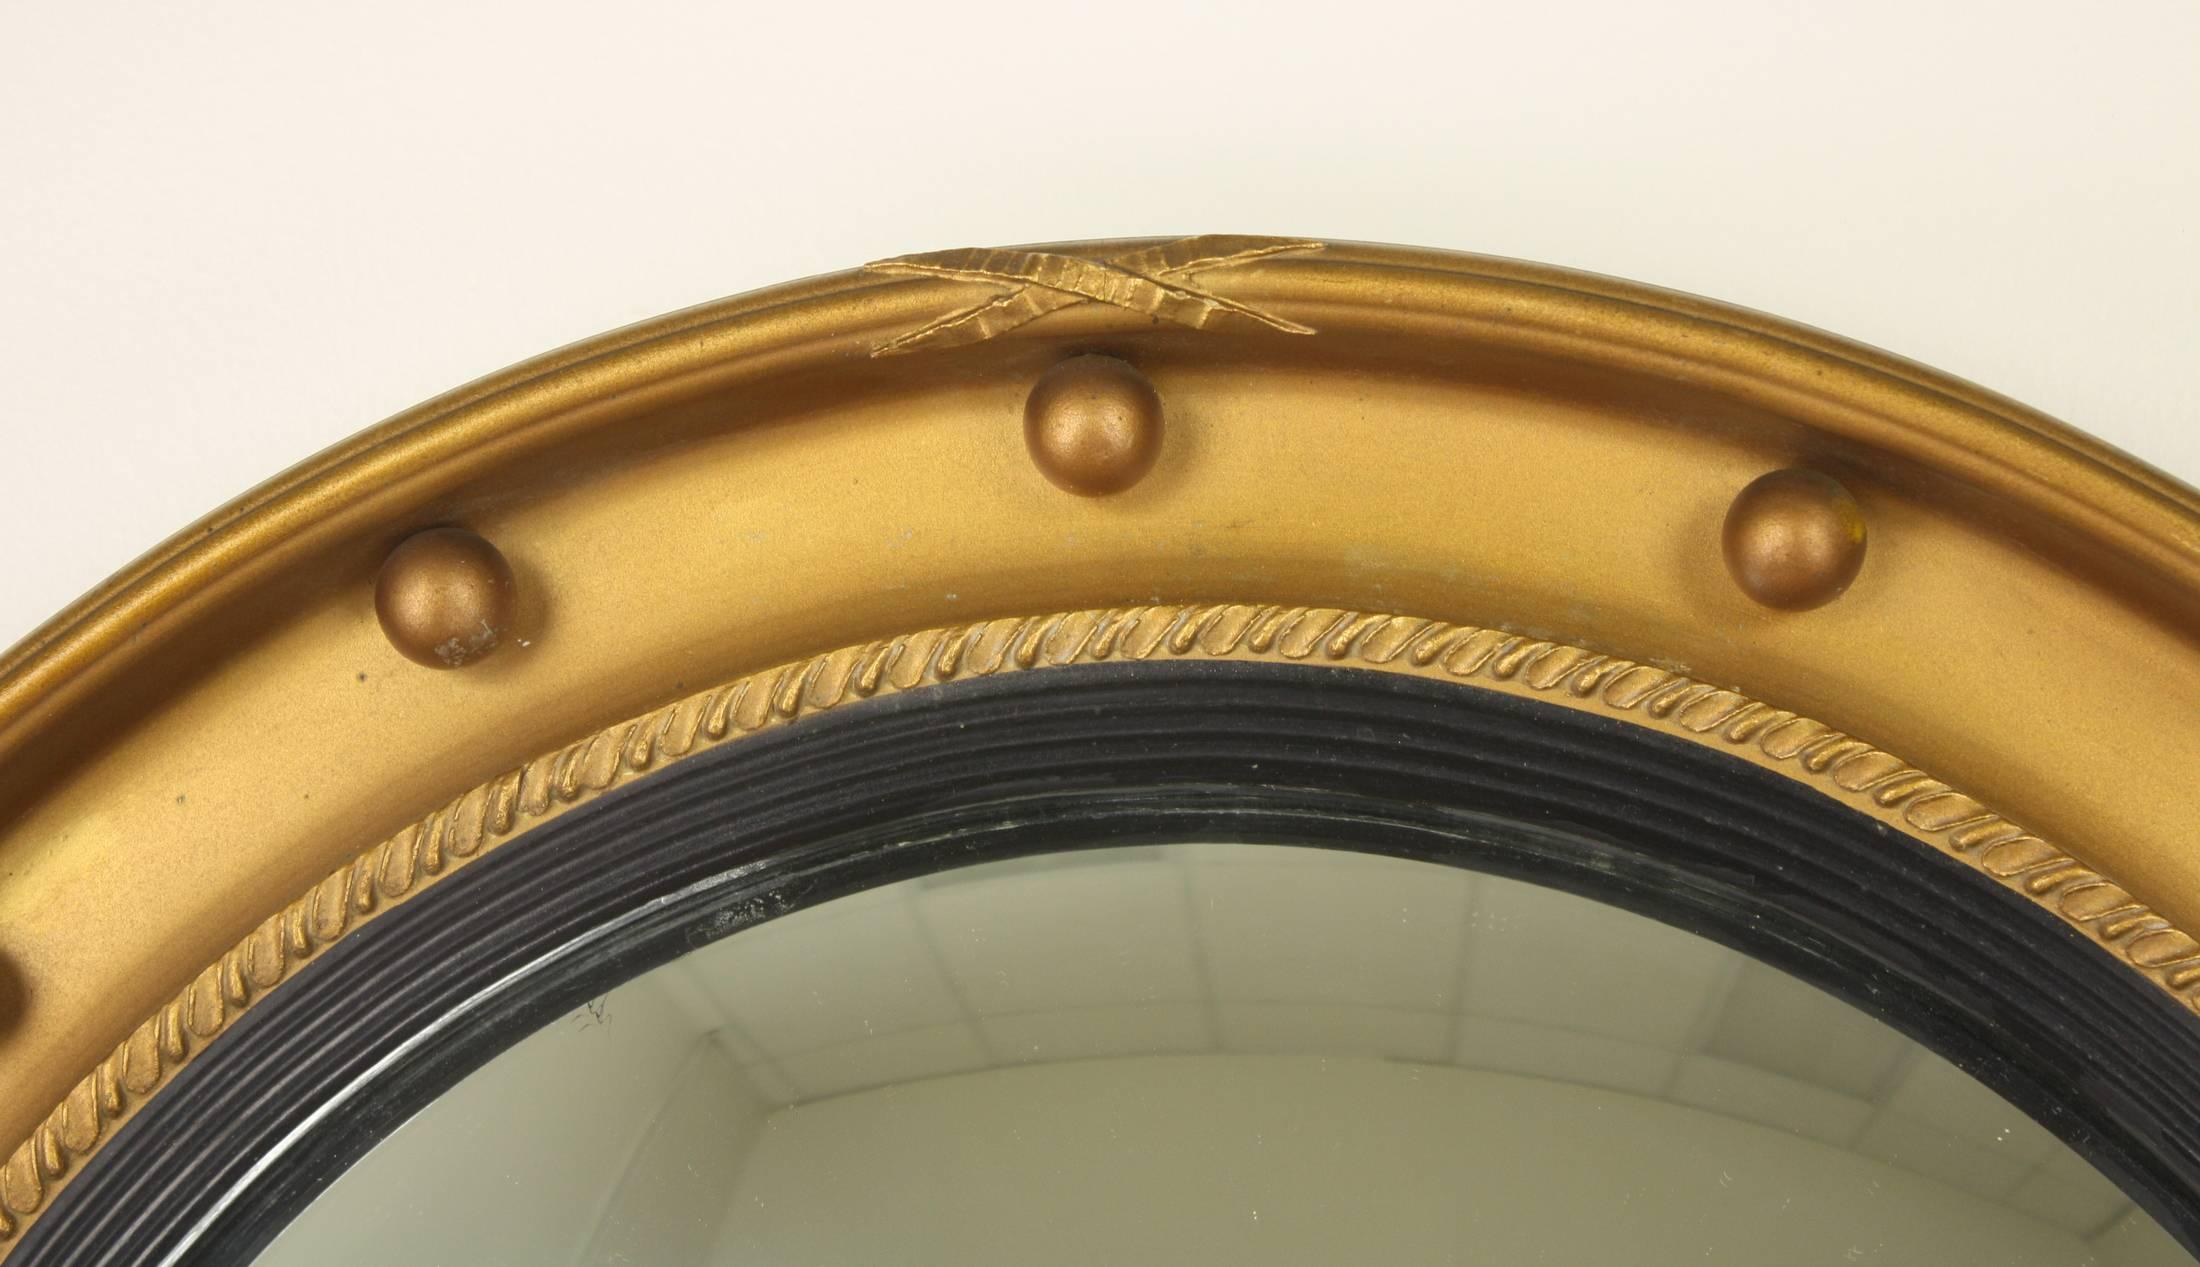 A 19th century wood and gesso frame, with a ribbed and ebonized inner band. The gilt finish is in very good antique condition, and the original glass is also, with small areas of spotting around the edge. A glamorous look!